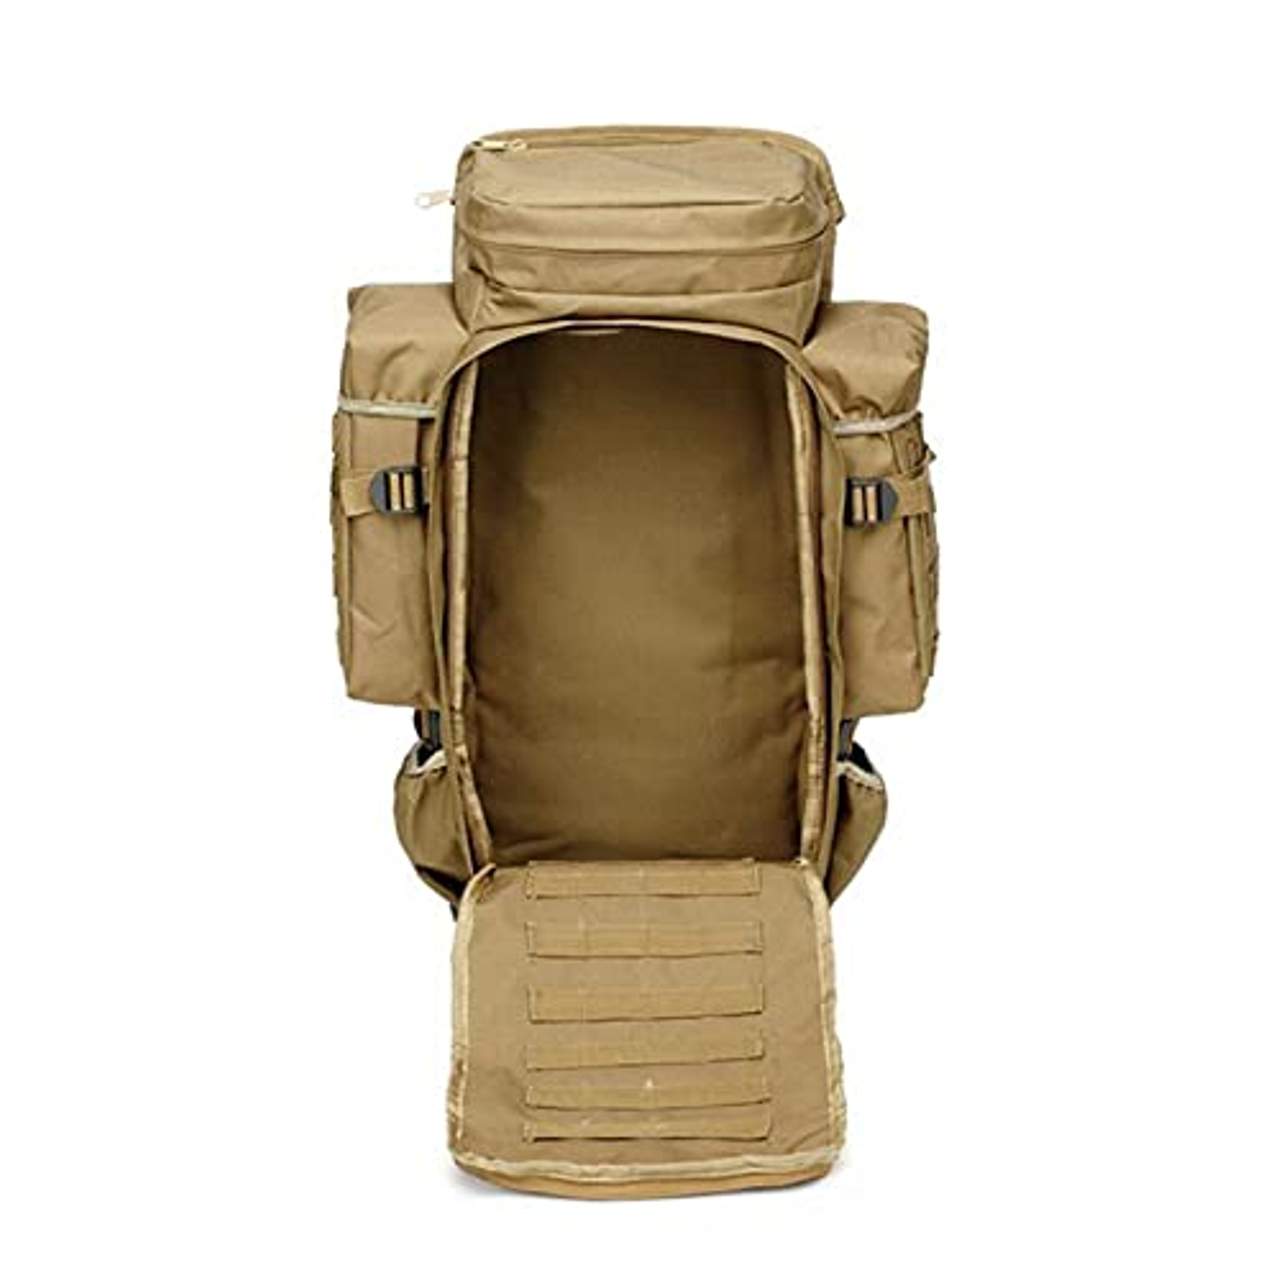 TongNS1 Survival Tactical Backpack